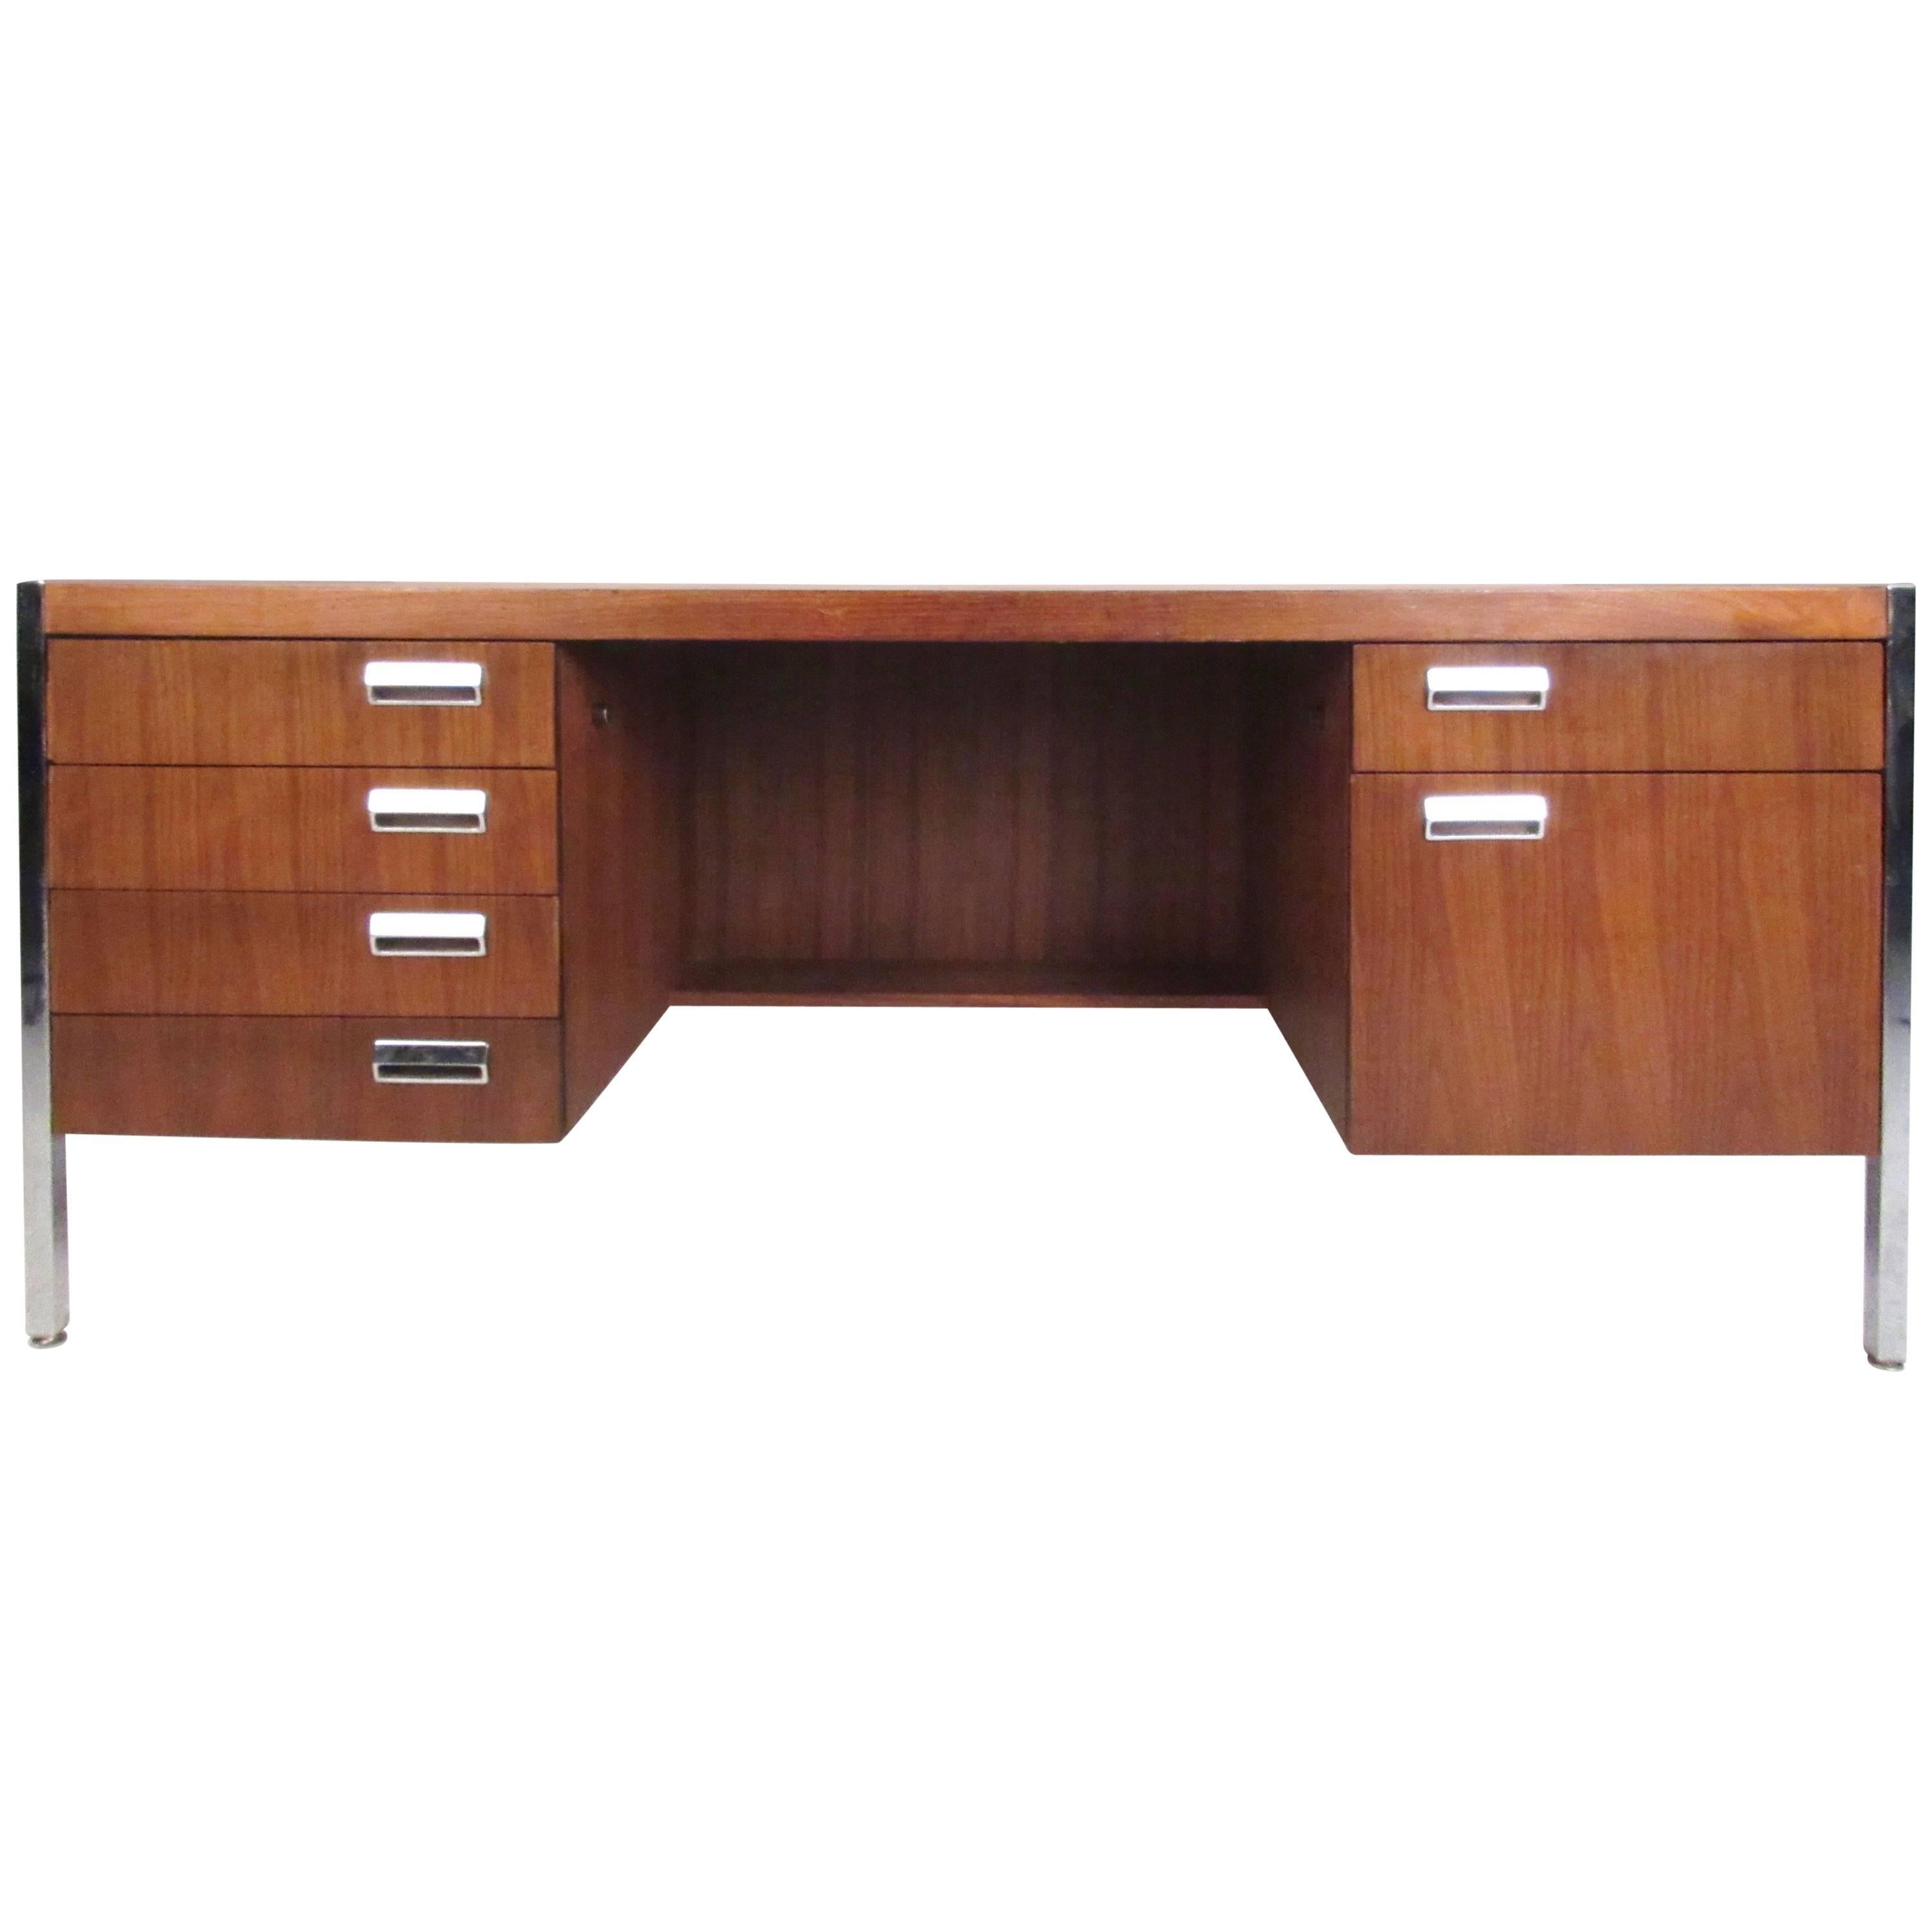 This stylish vintage desk features six drawers for storage, striking vintage walnut finish and Milo Baughman style chrome legs and handles. Finished cut-away back makes this a beautiful addition to any home or business office. Please confirm item